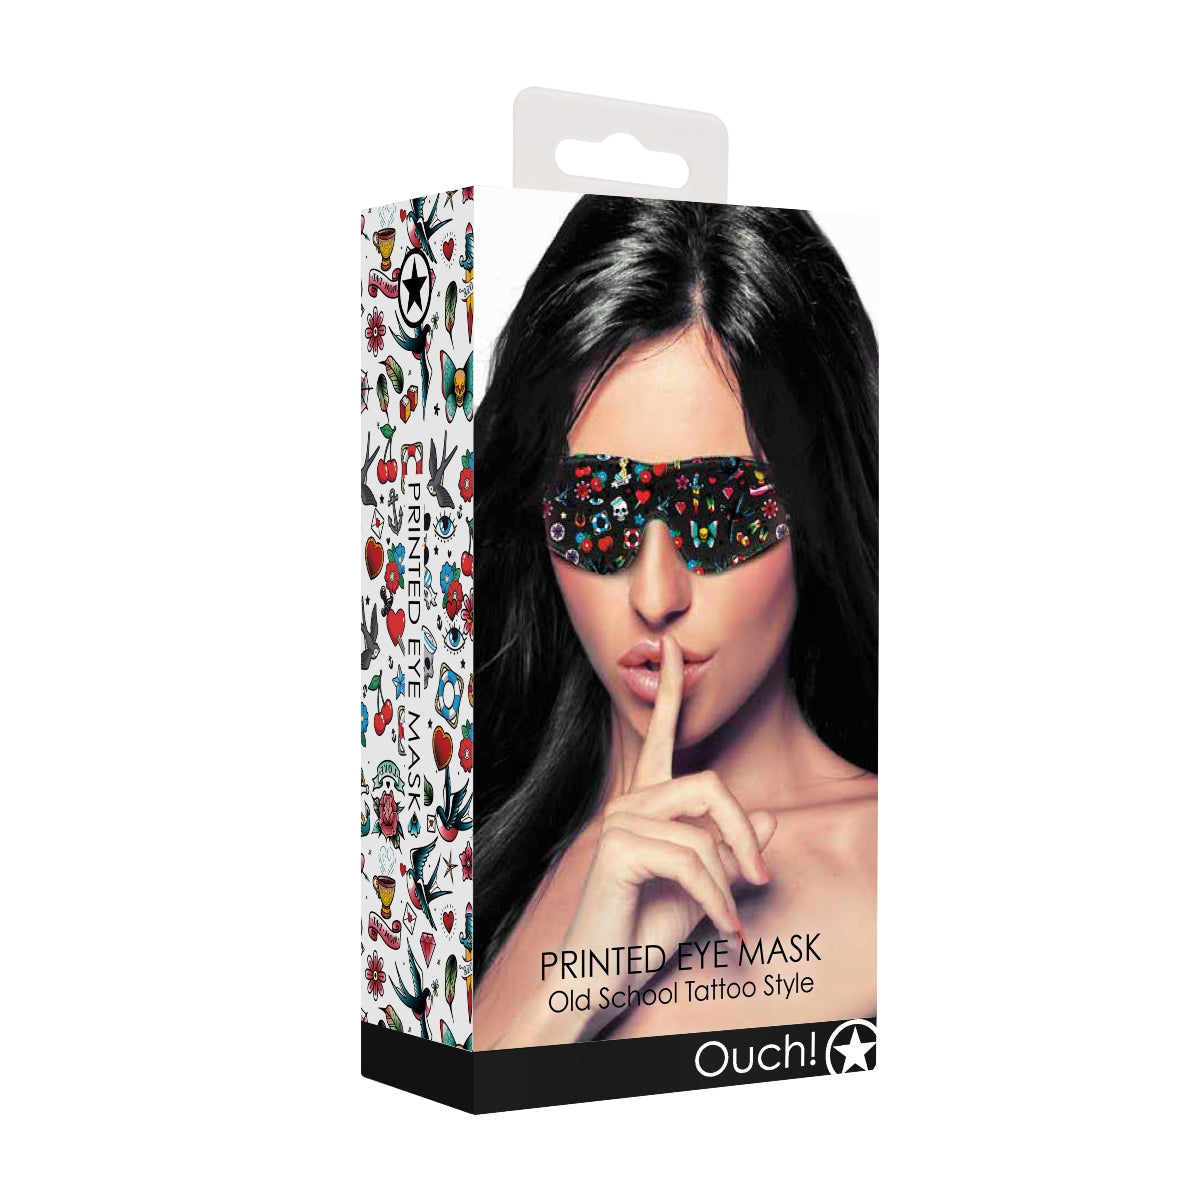 Ouch Old School Tattoo Style Printed Eye Mask